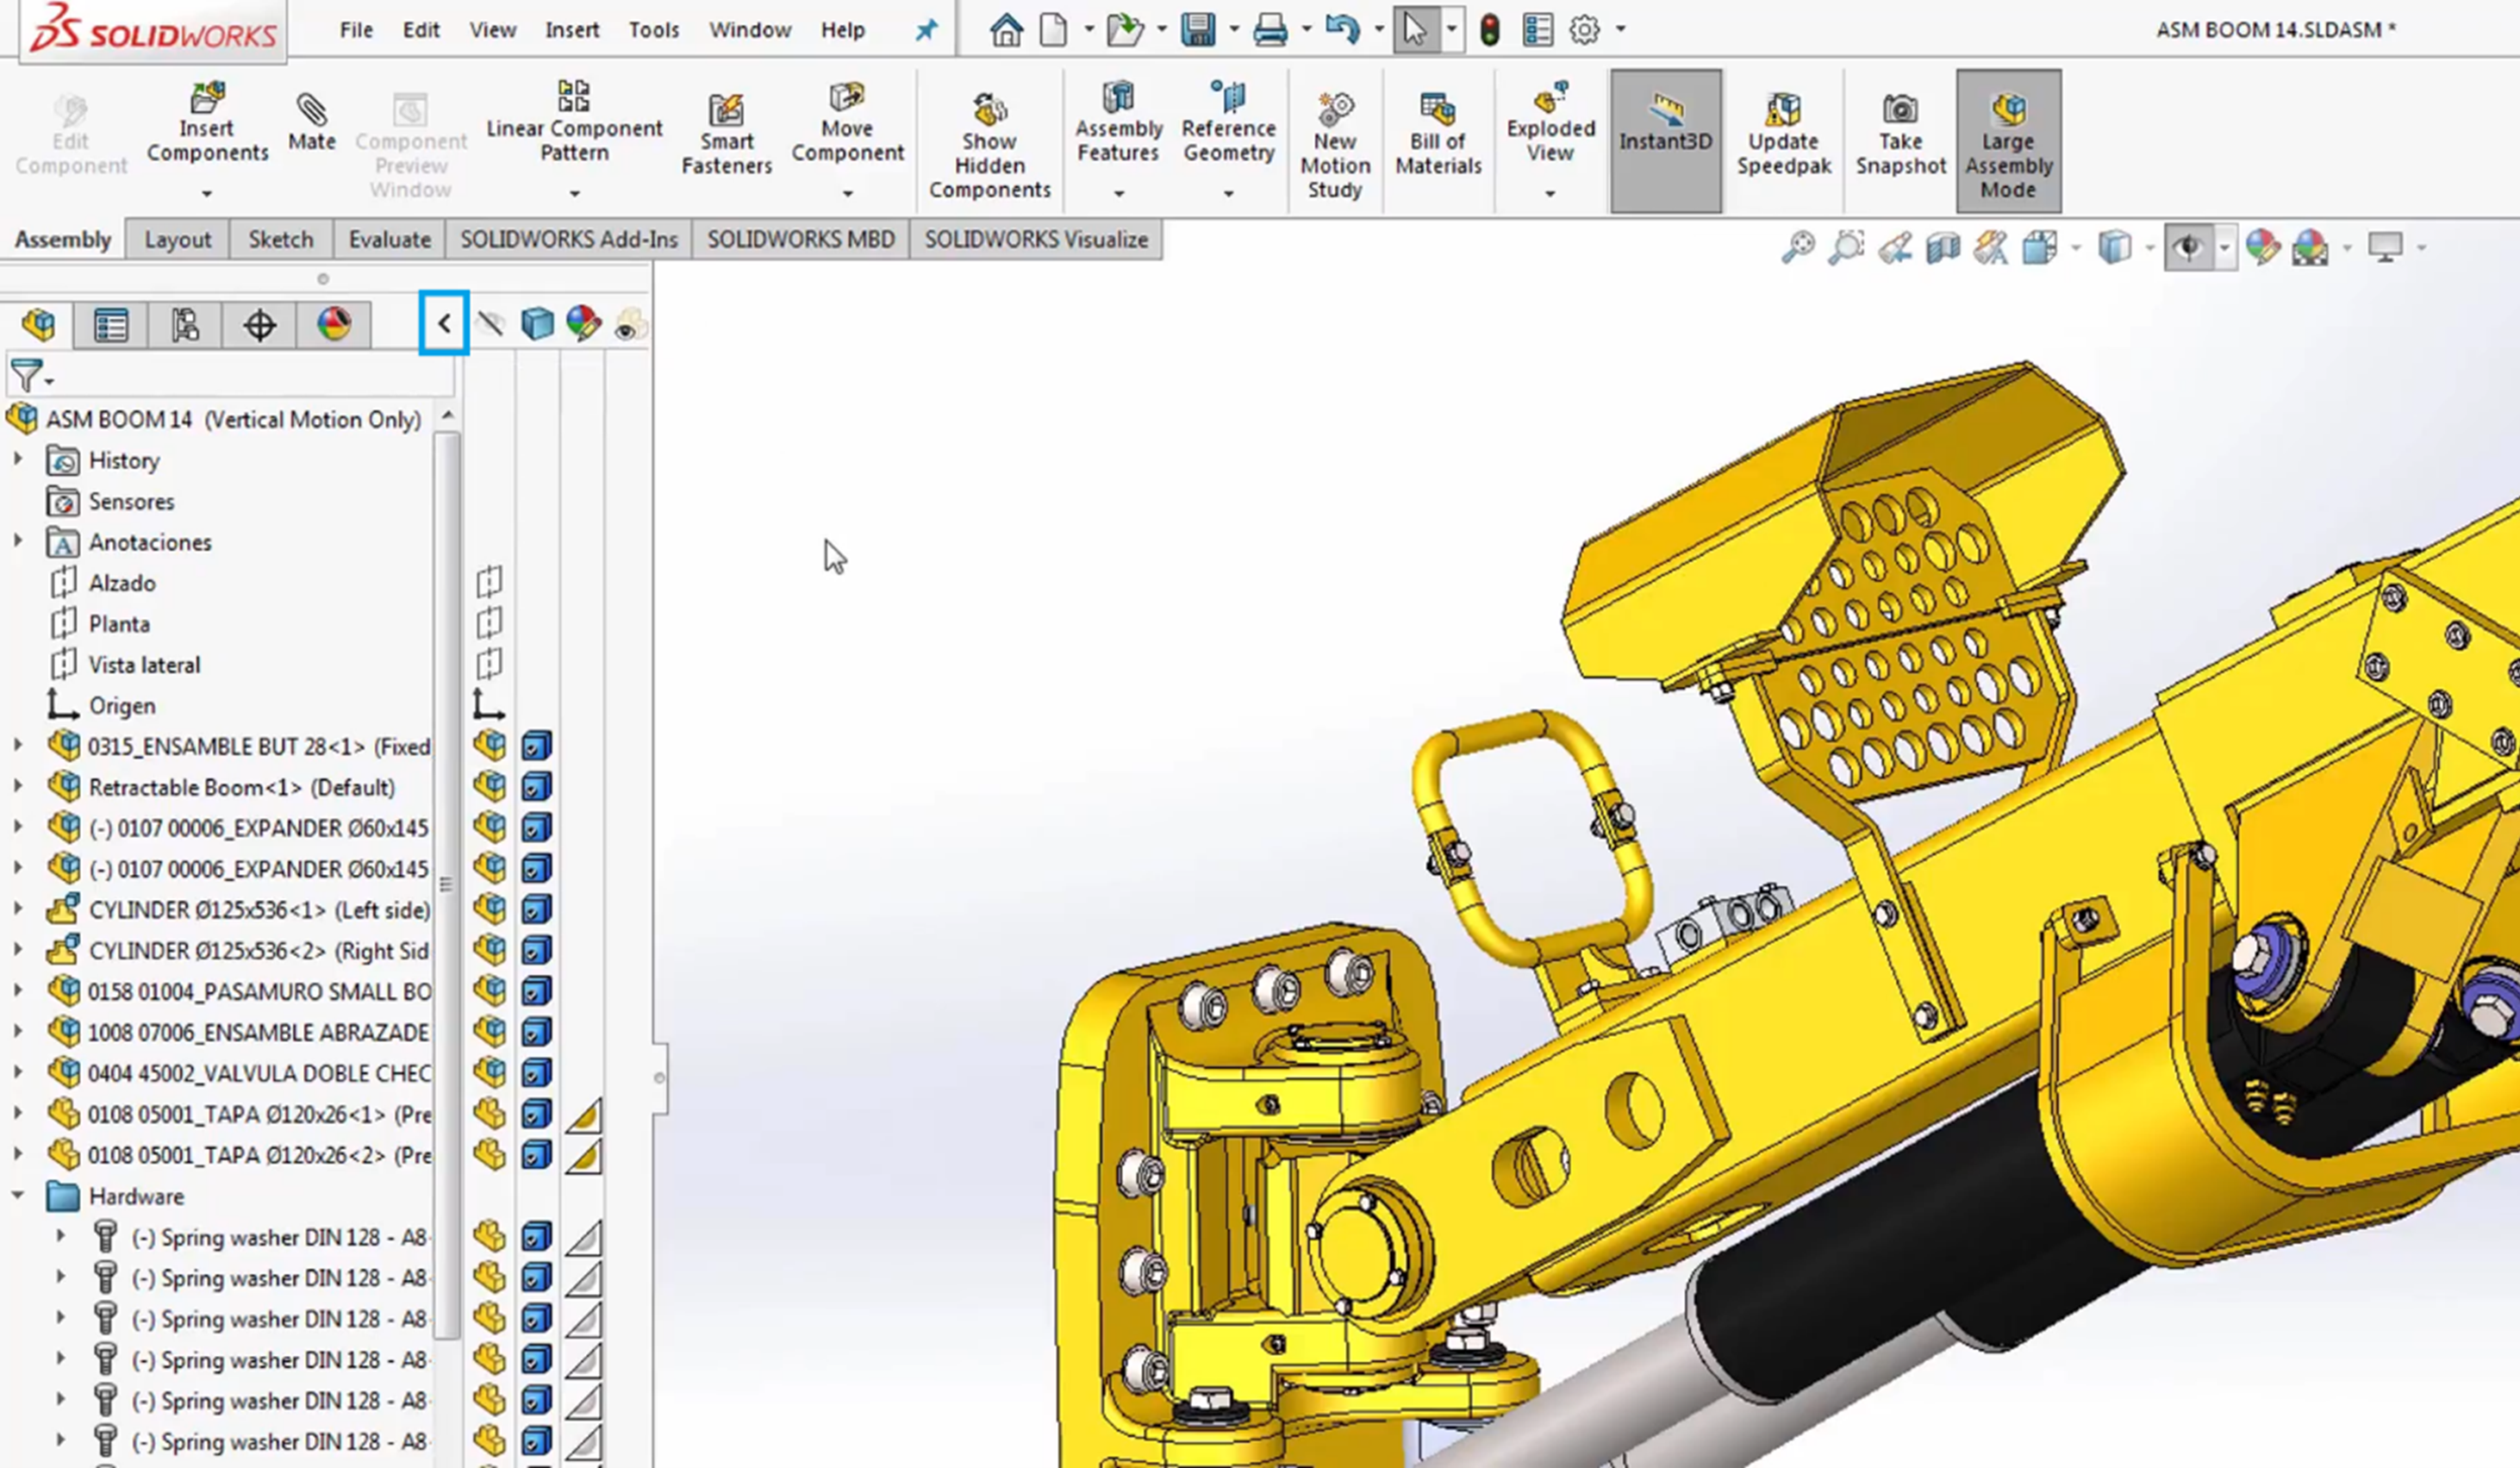 Image Overlay Transparency in Drawing  SolidWorks  AutoCAD Forums